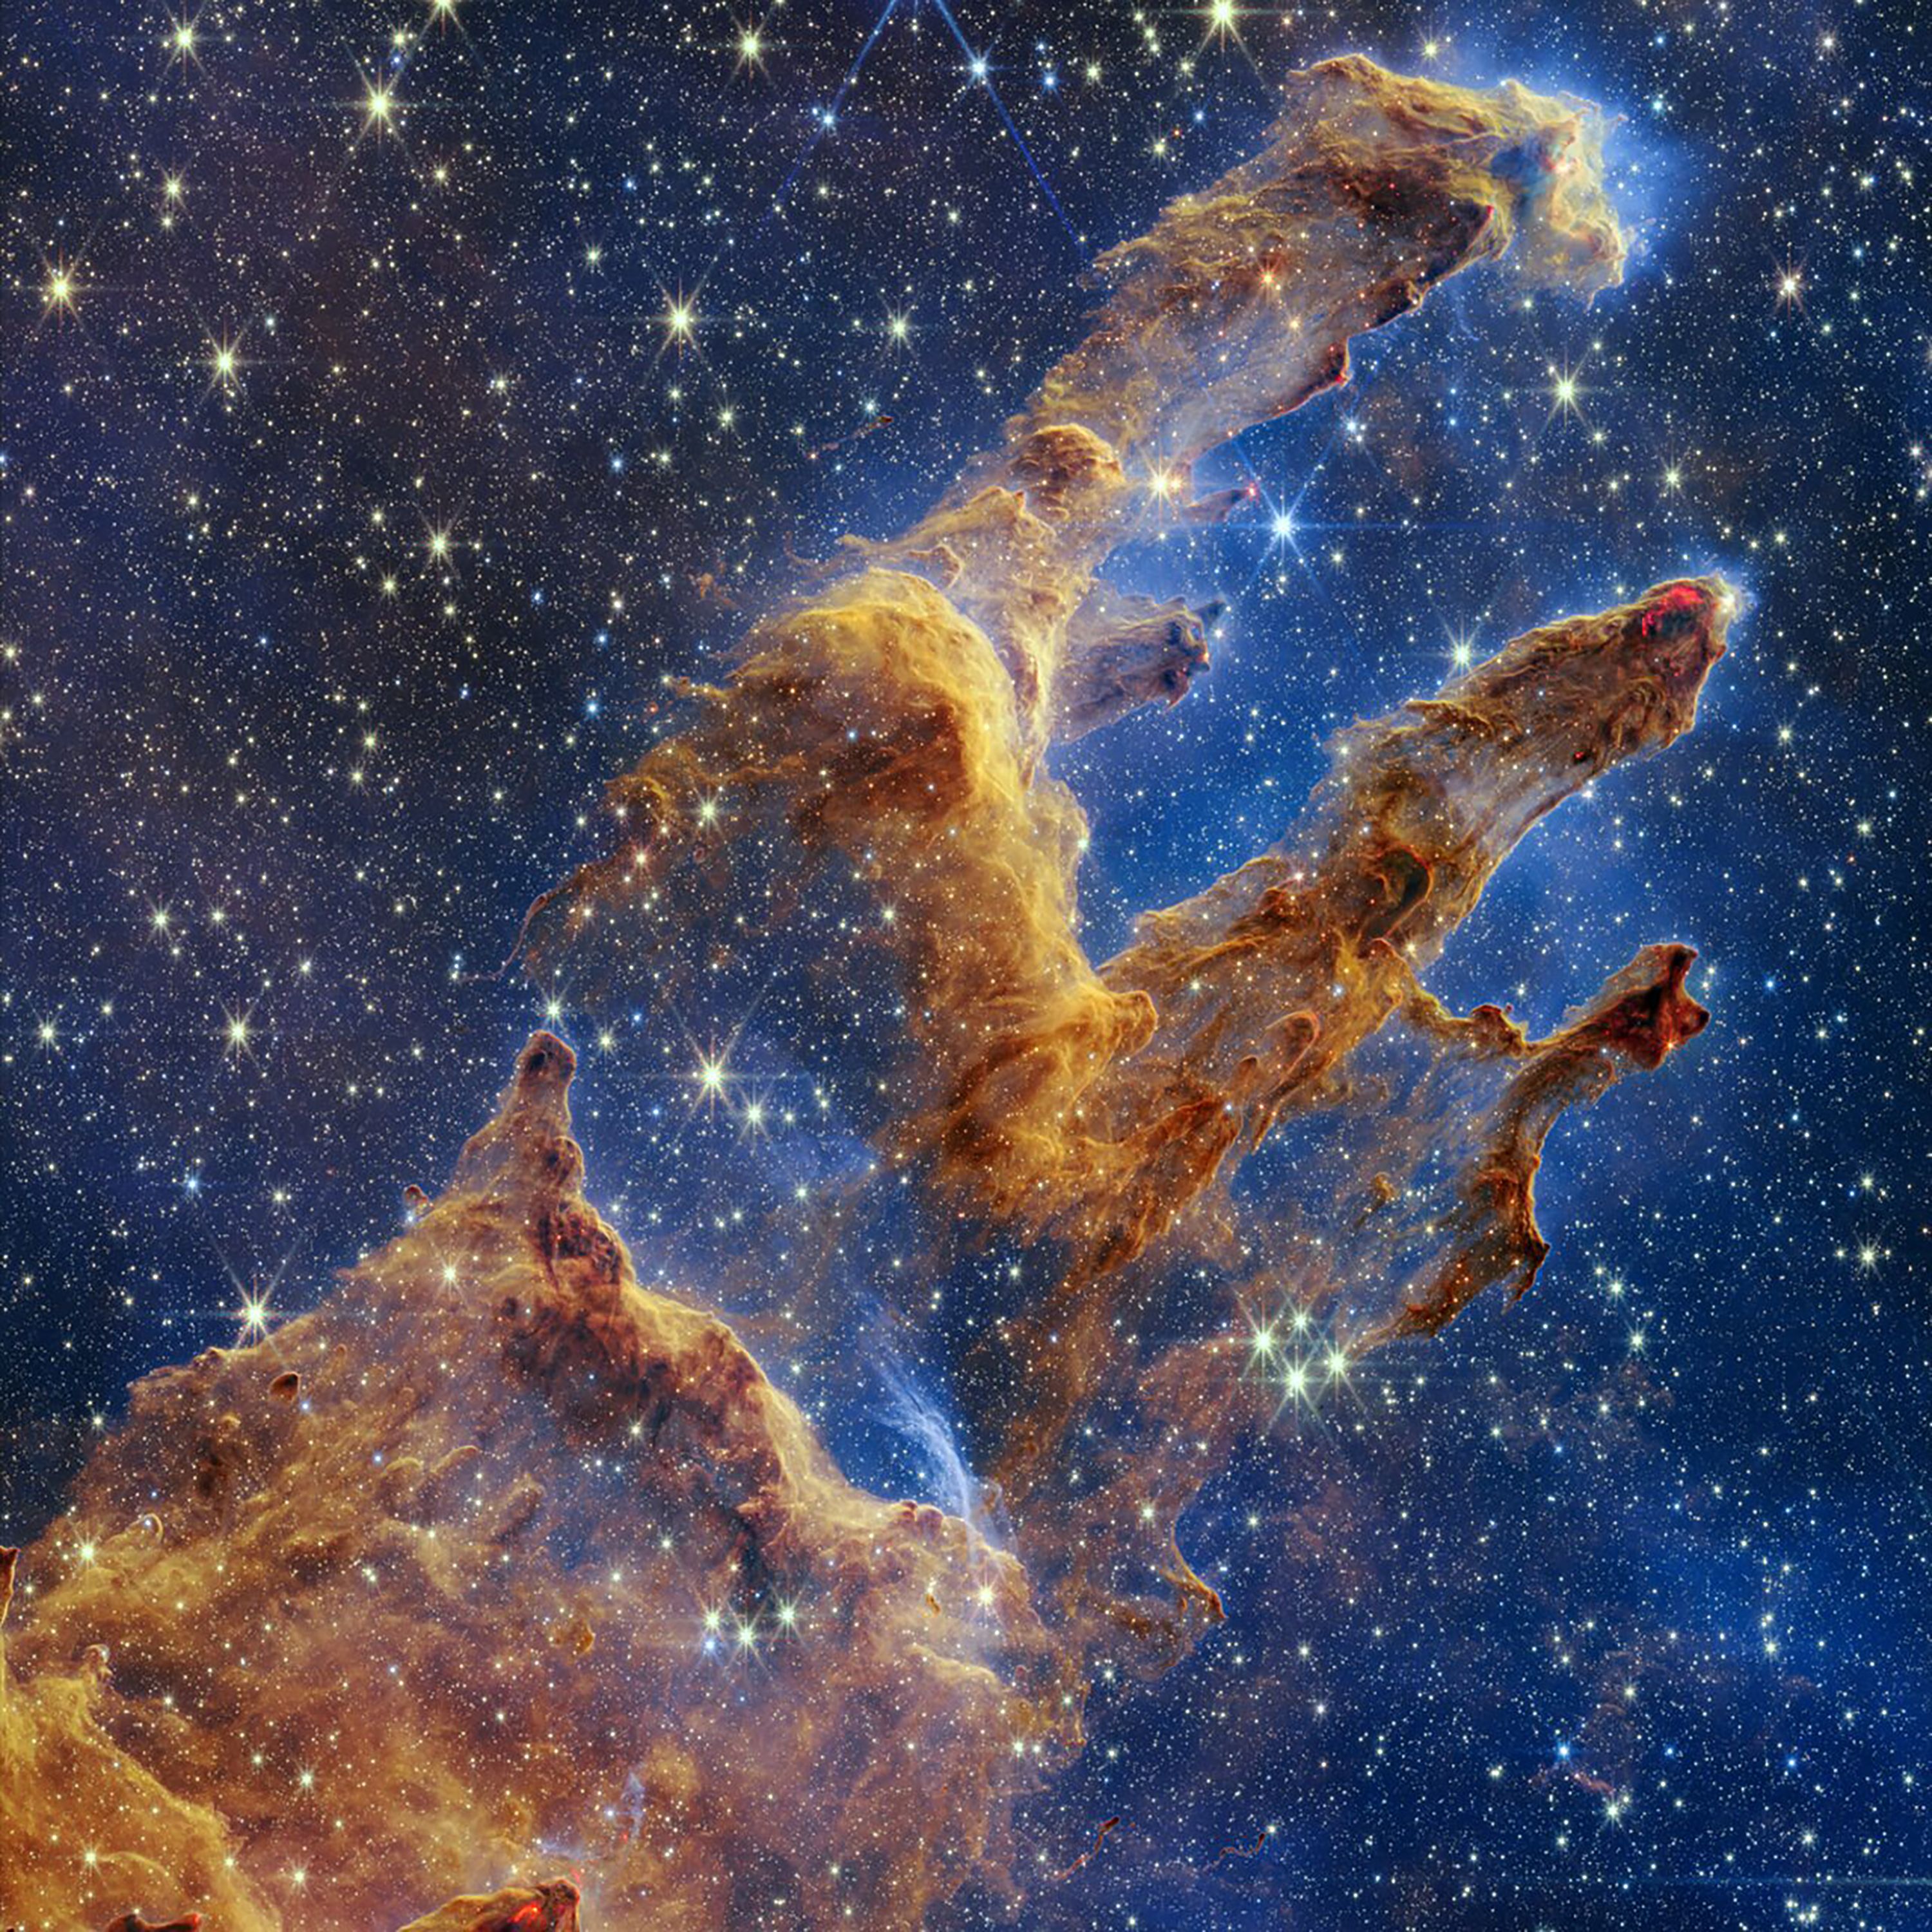 NASA's Hubble telescope captures spectacular image of star-studded cosmic  cloud.